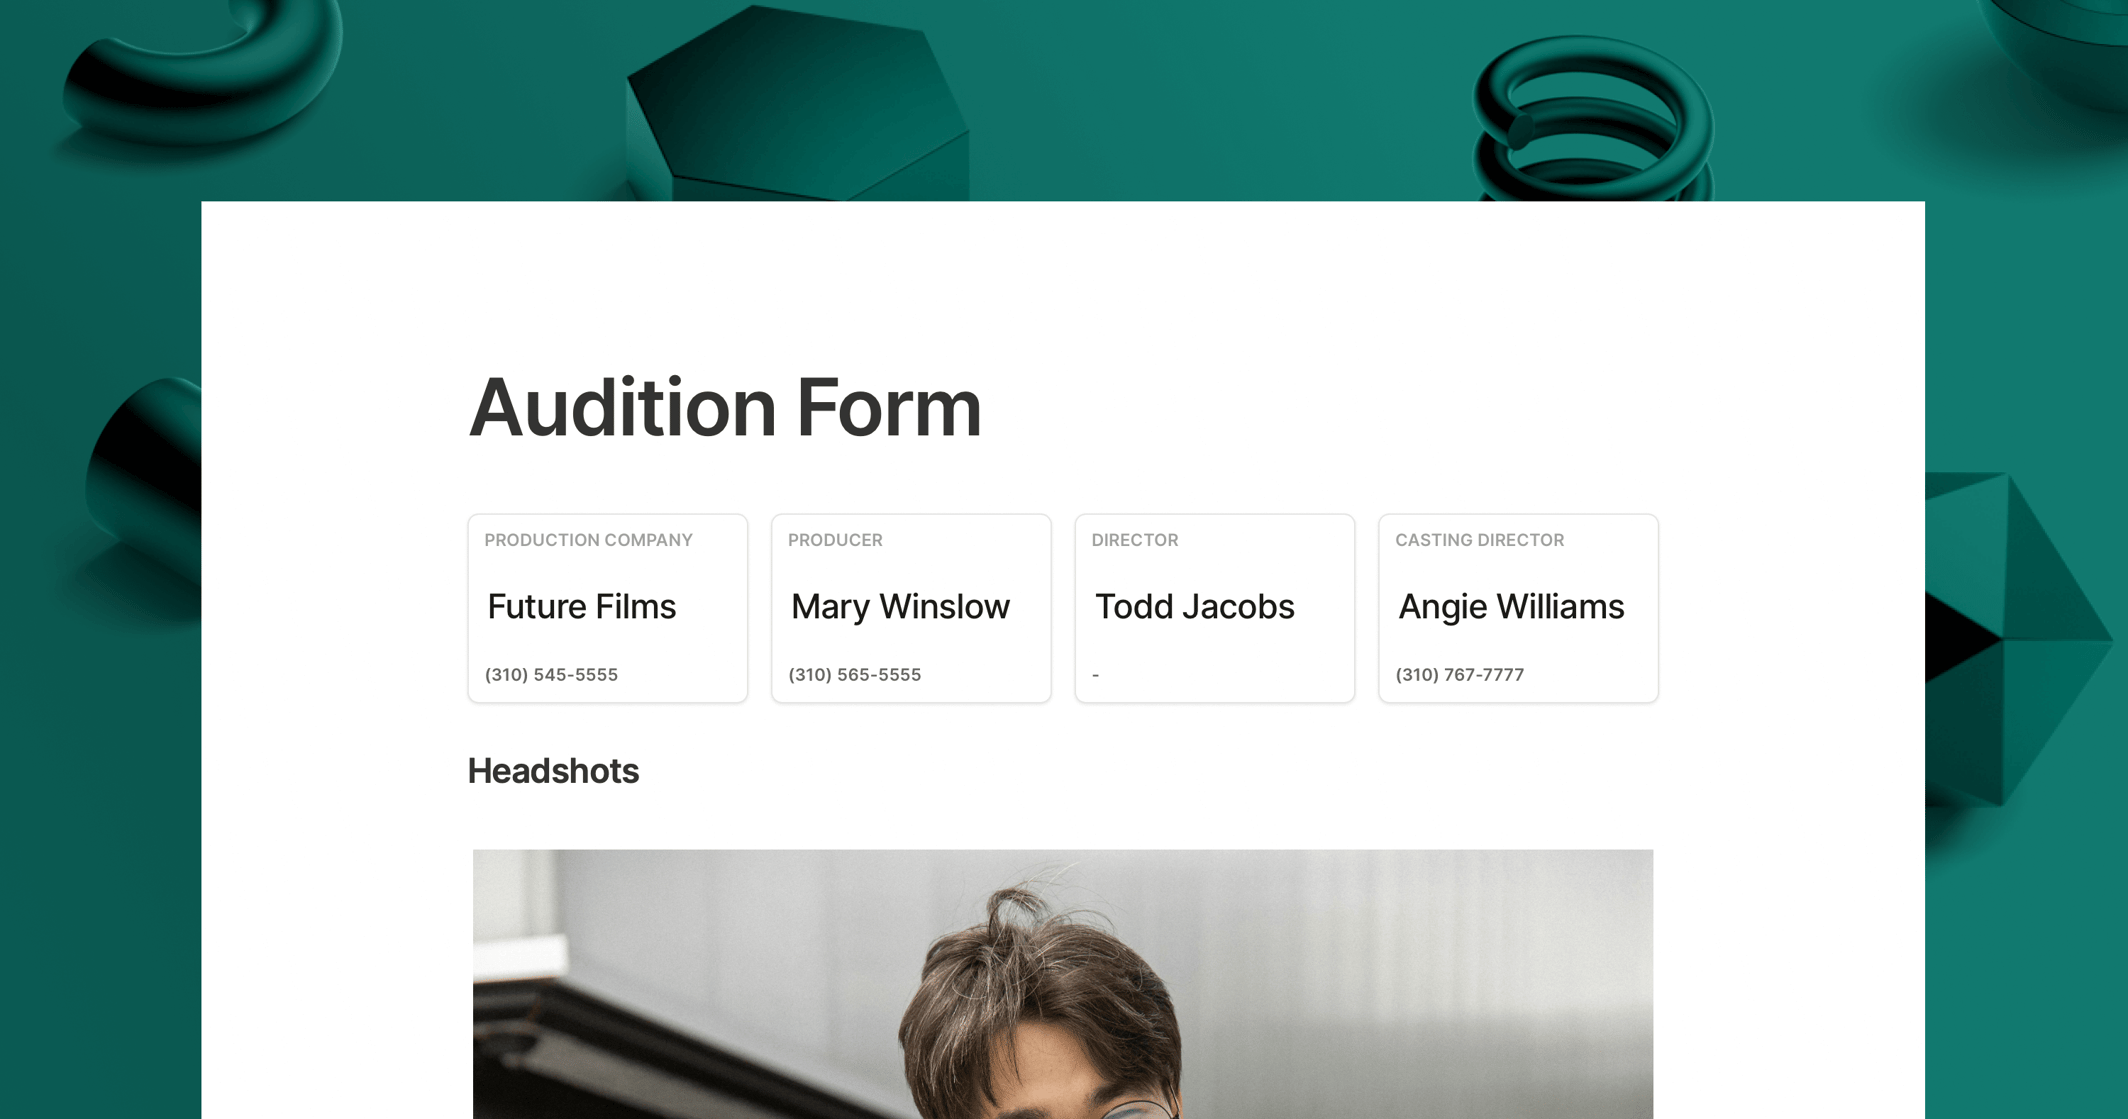 https://3389140.fs1.hubspotusercontent-na1.net/hubfs/3389140/audition%20form%20cover-1.png